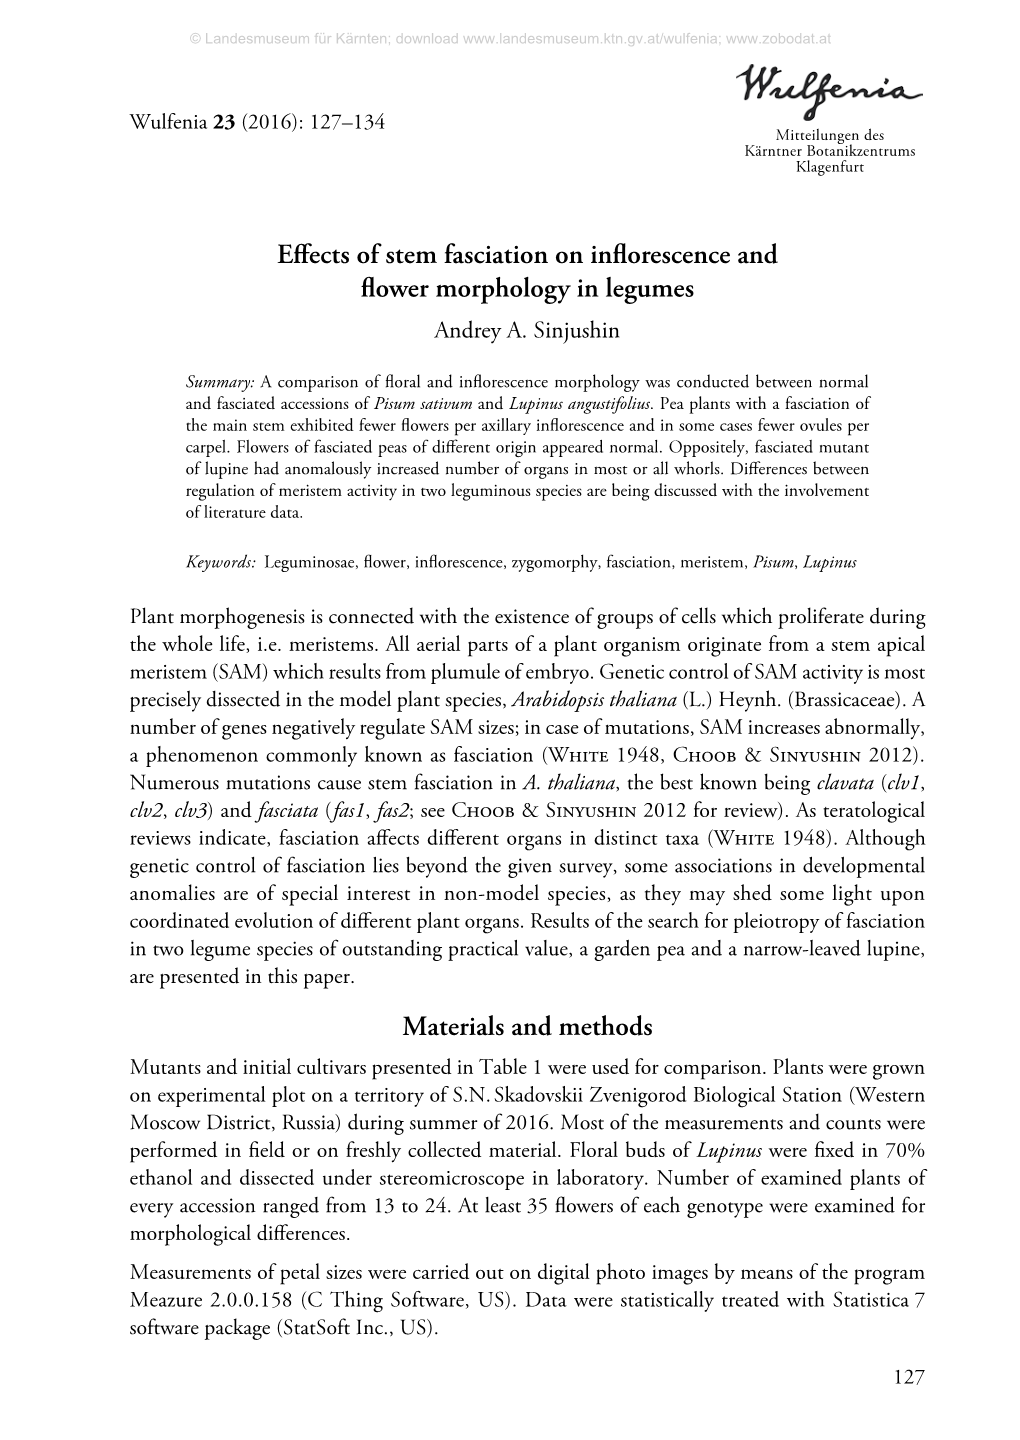 Effects of Stem Fasciation on Inflorescence and Flower Morphology in Legumes Andrey A